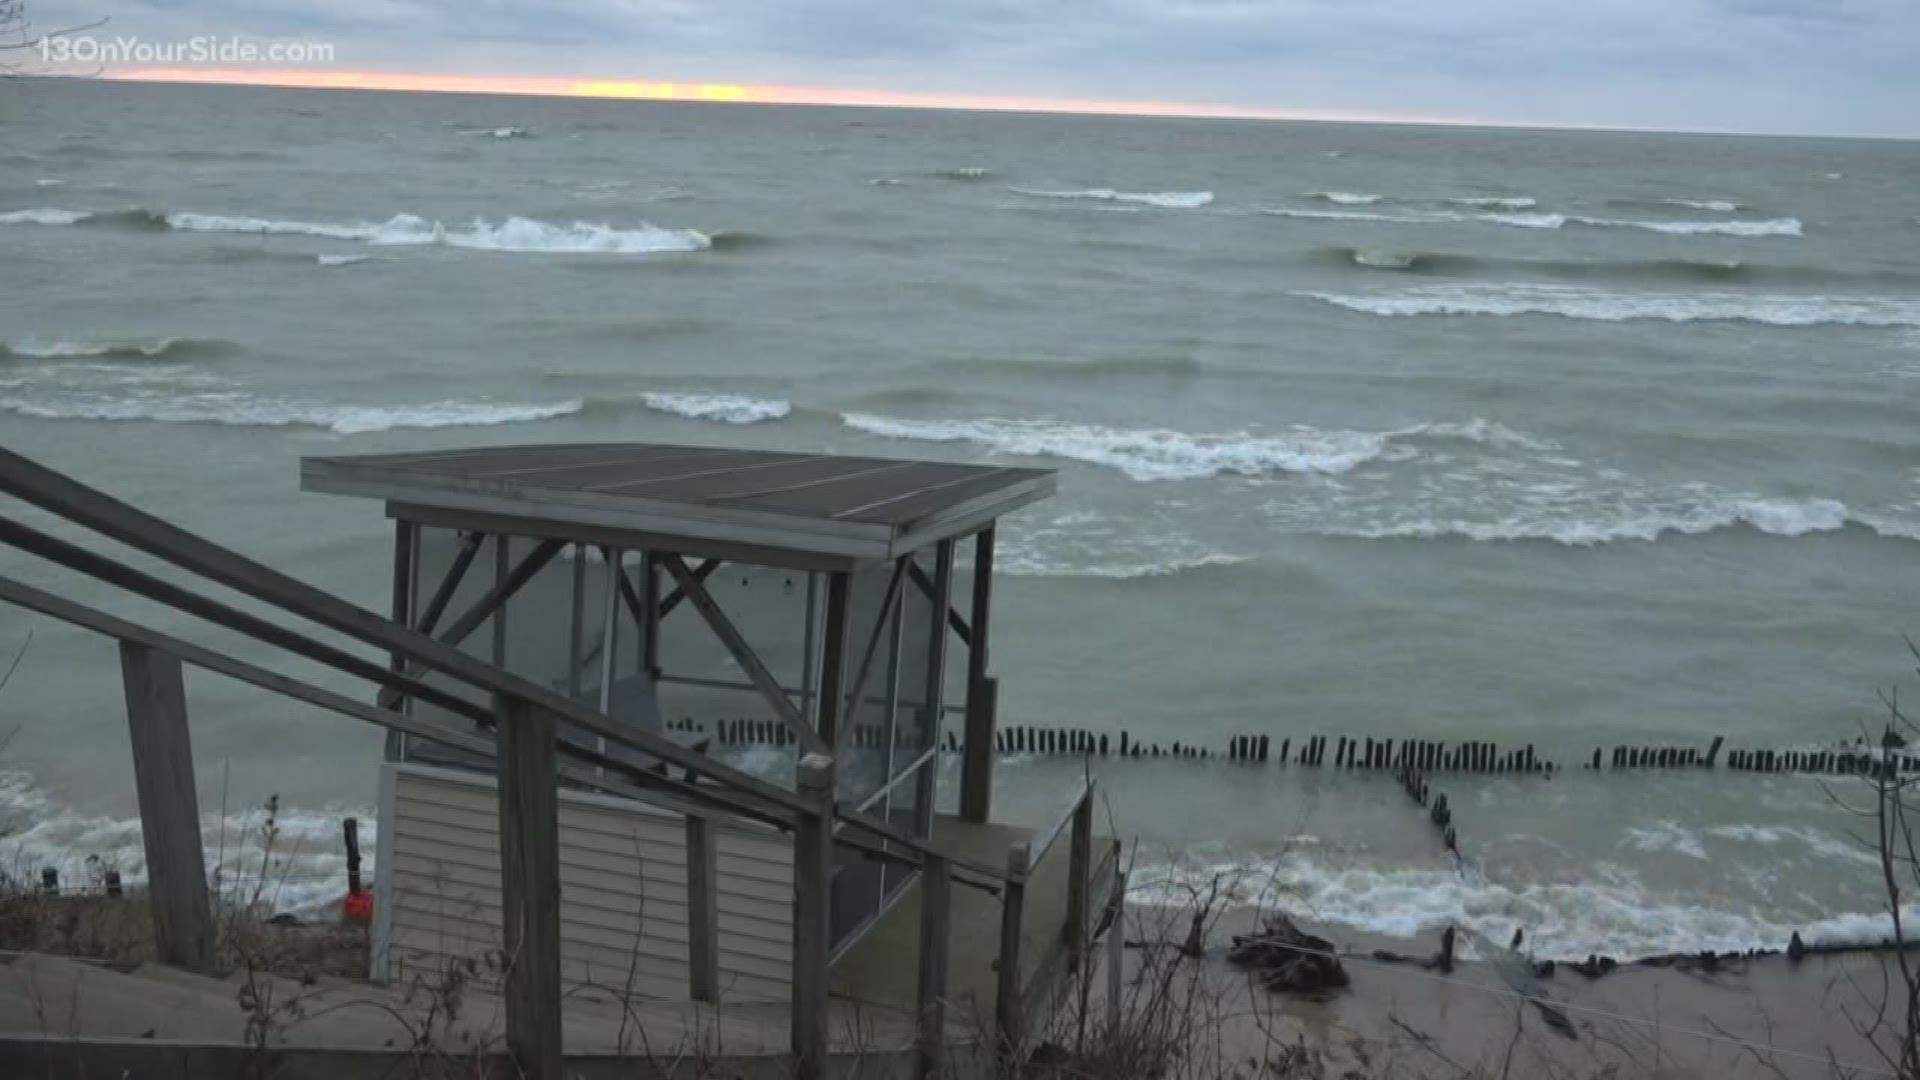 The lakeshore has been battered by strong winds and waves, and homeowners are hoping the state can help protect from erosion.